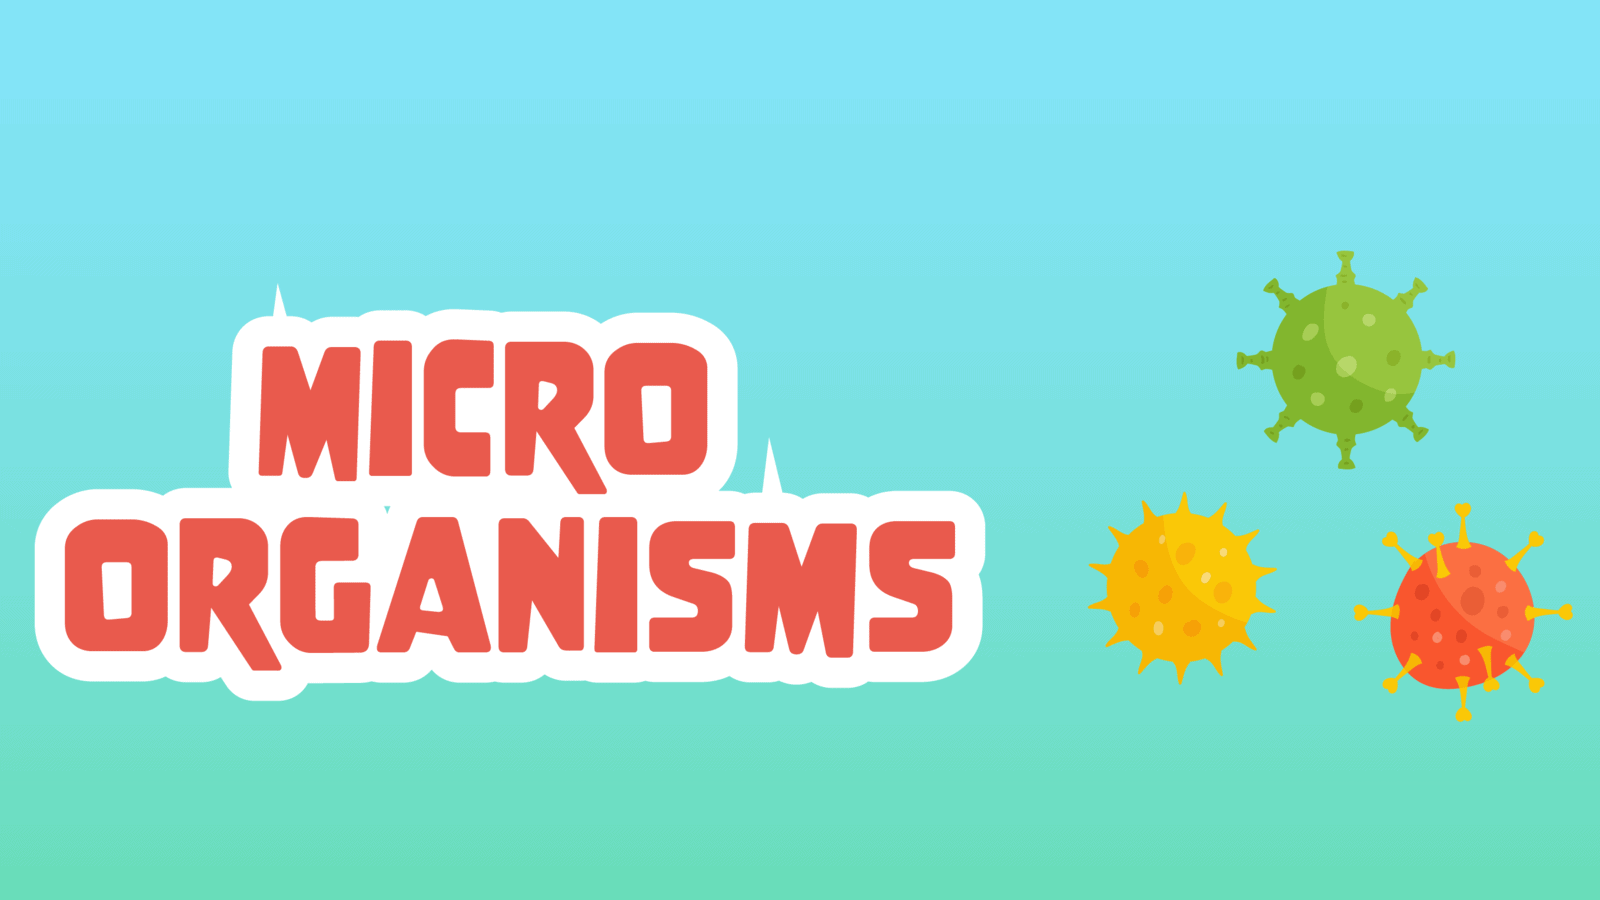 Microorganisms Facts for Kids – 5 Magical Facts about Microorganisms